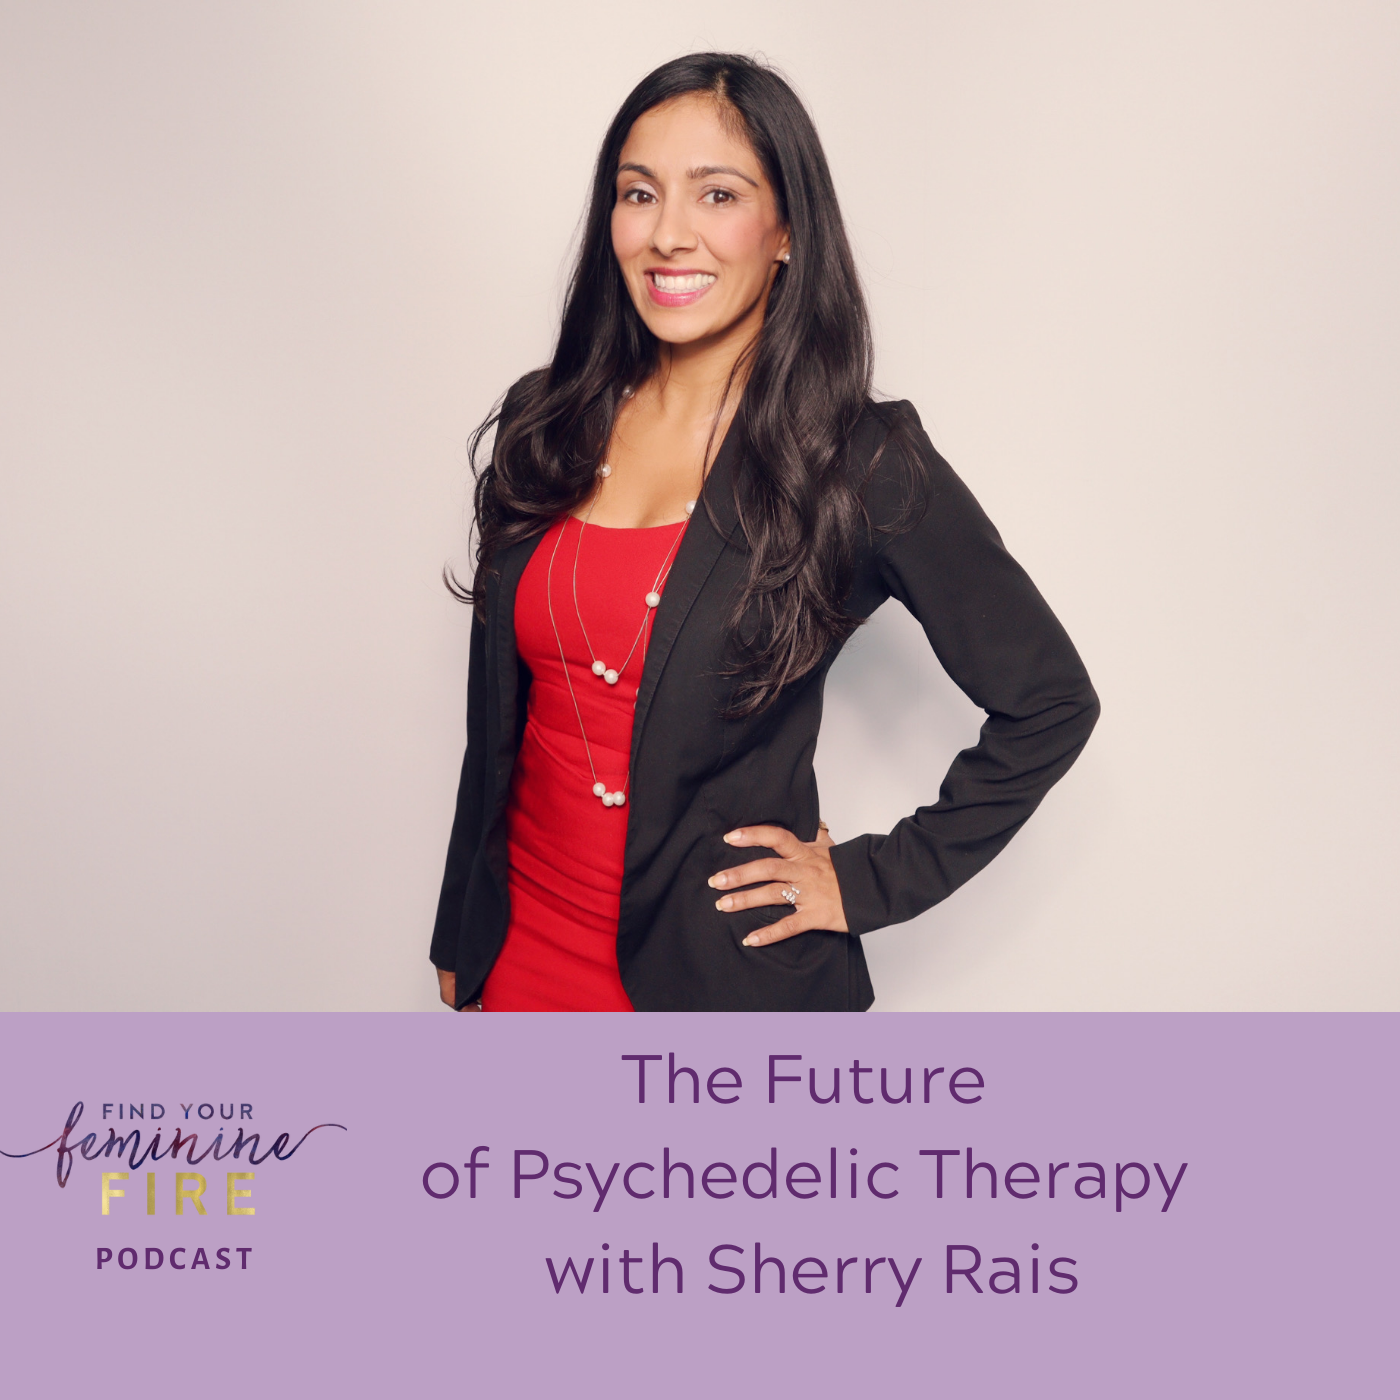 The Future of Psychedelic Therapy with Sherry Rais